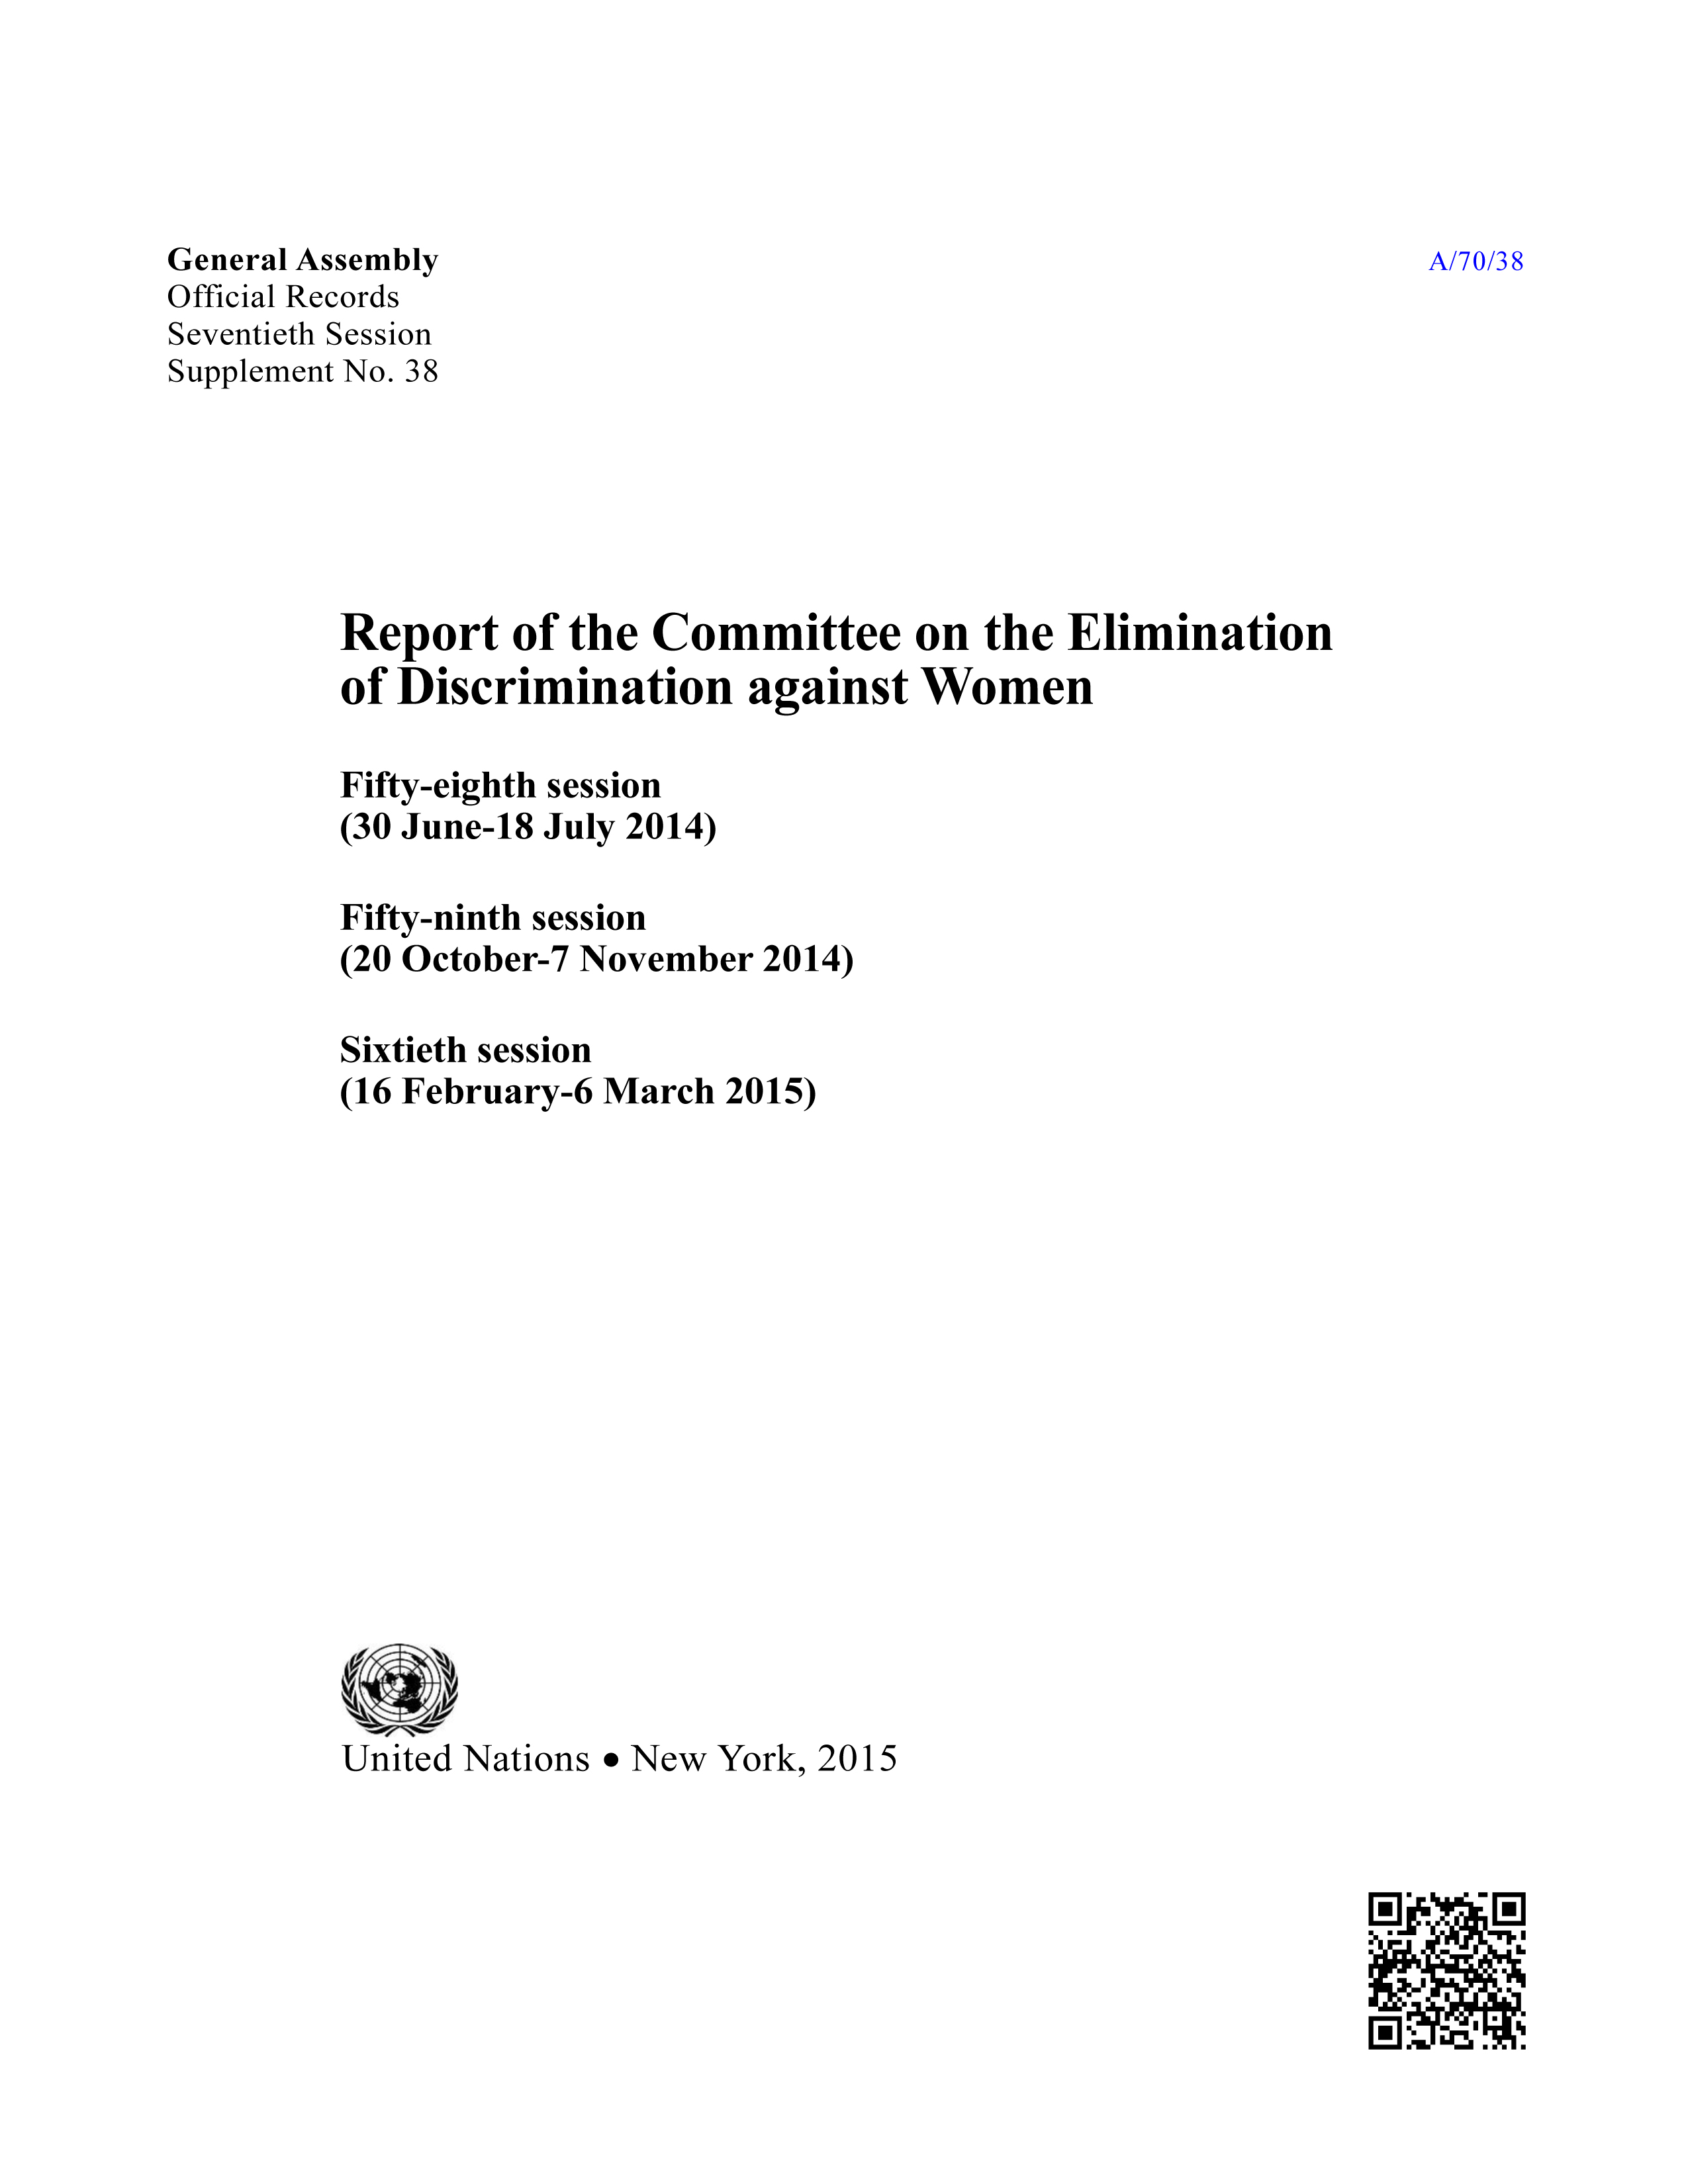 image of Adoption of the report